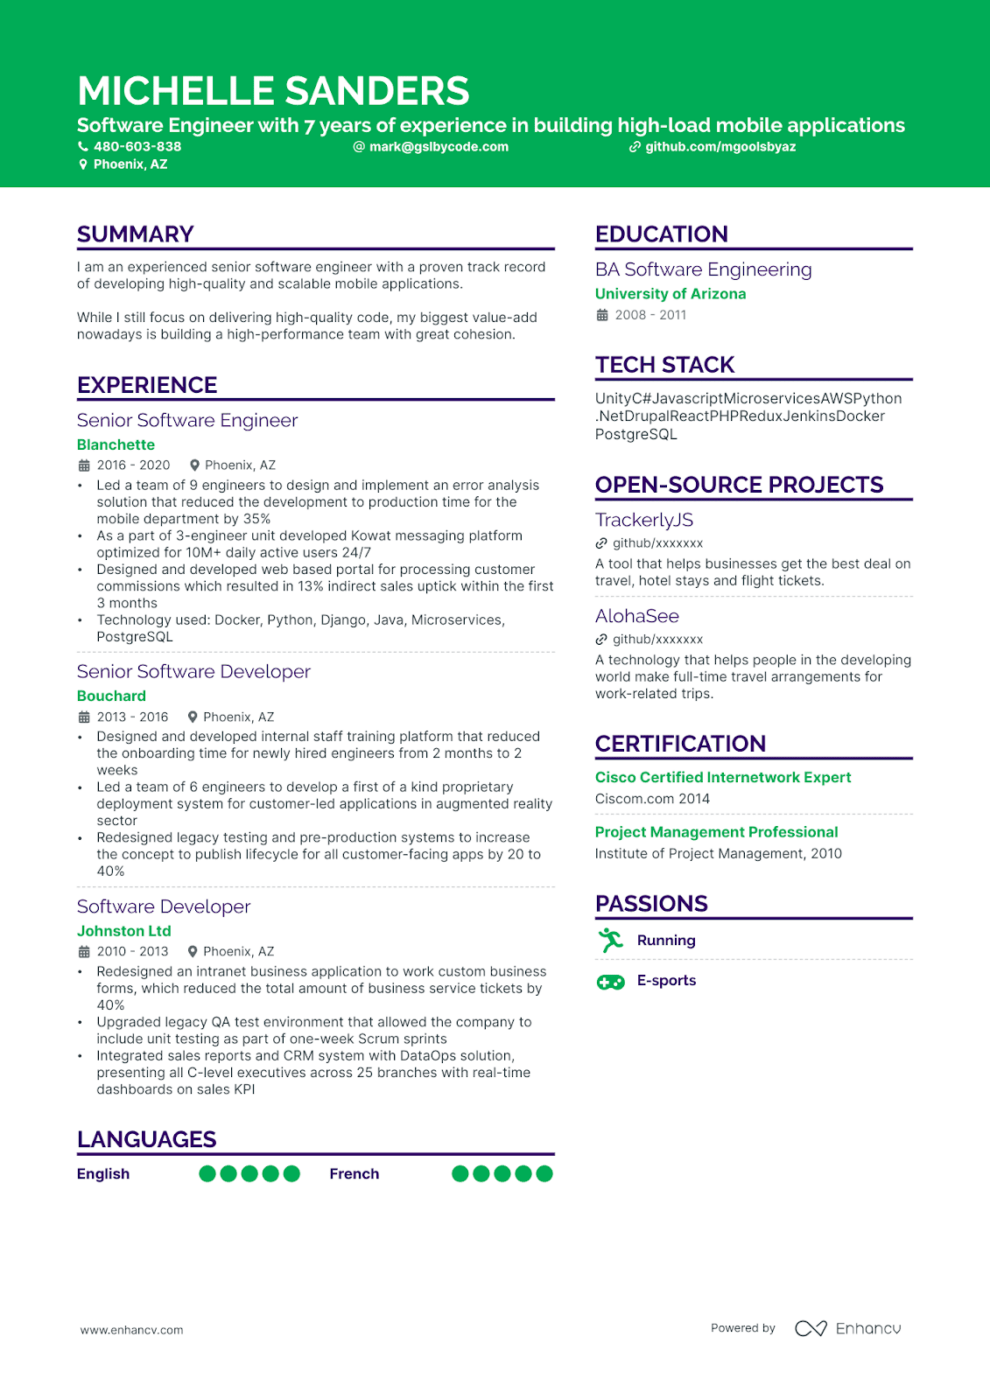 Traditional Technical Resume Template by Enhancv